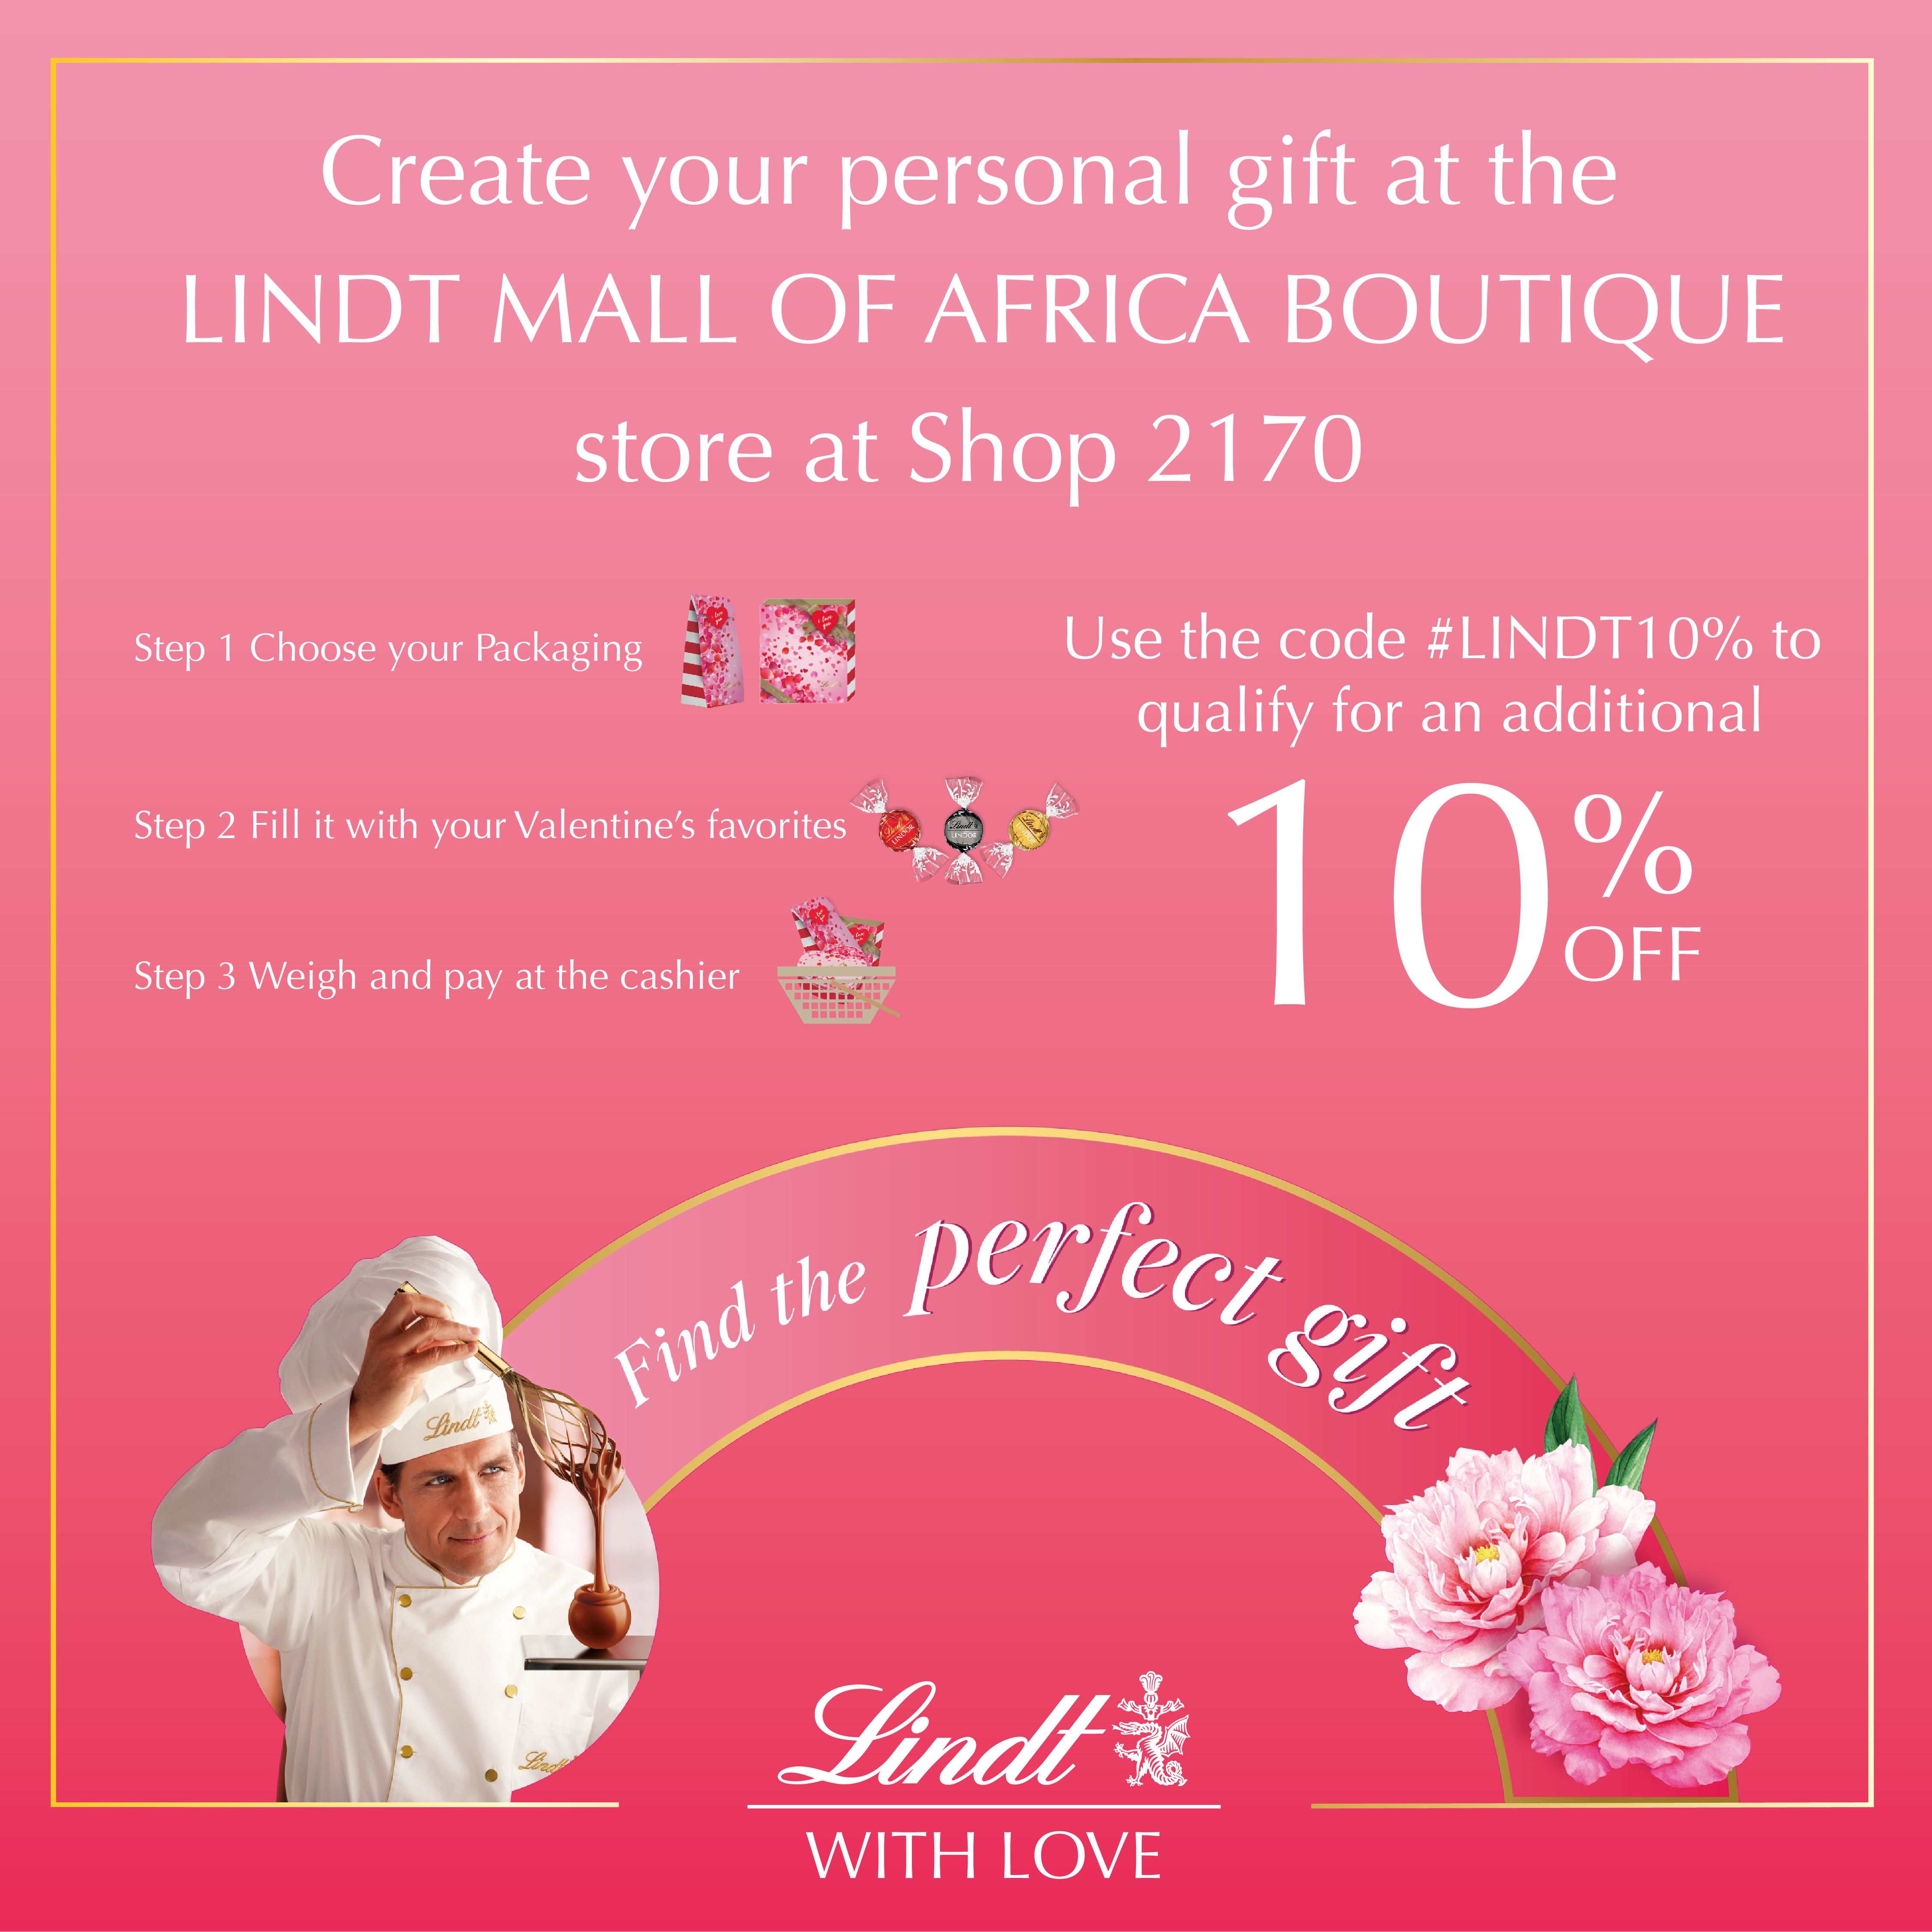 CREATE YOUR PERSONAL GIFT AT THE LINDT BOUTIQUE. 